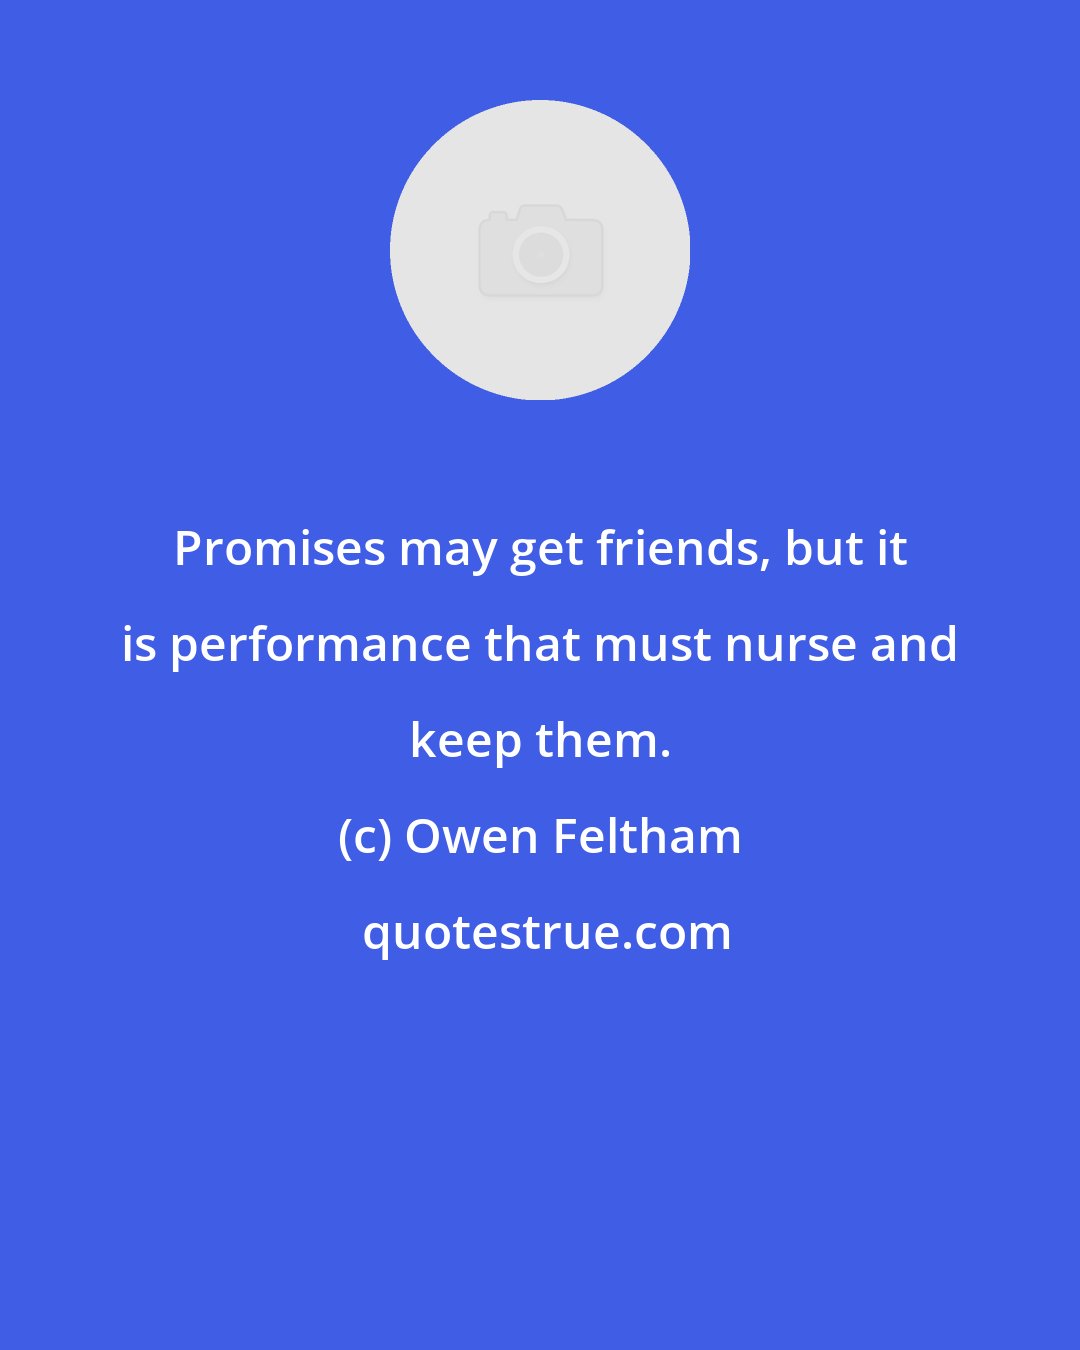 Owen Feltham: Promises may get friends, but it is performance that must nurse and keep them.